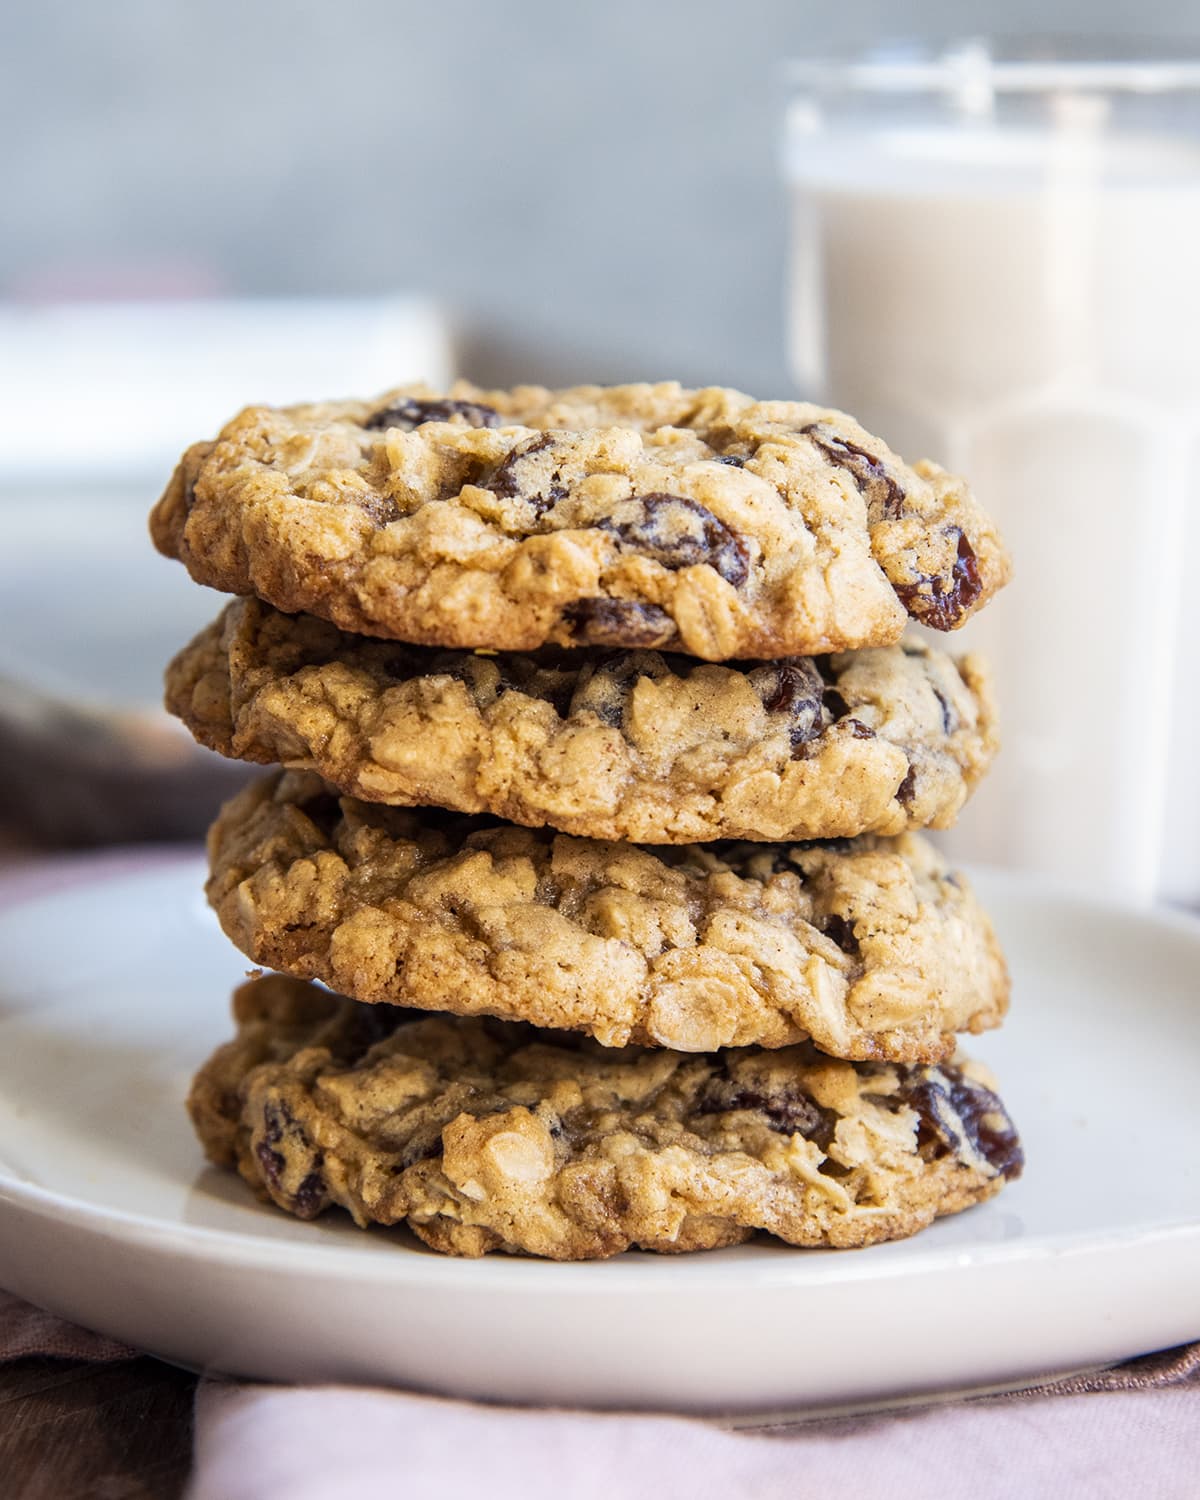 A stack of 4 oatmeal raisin cookies on a plate.